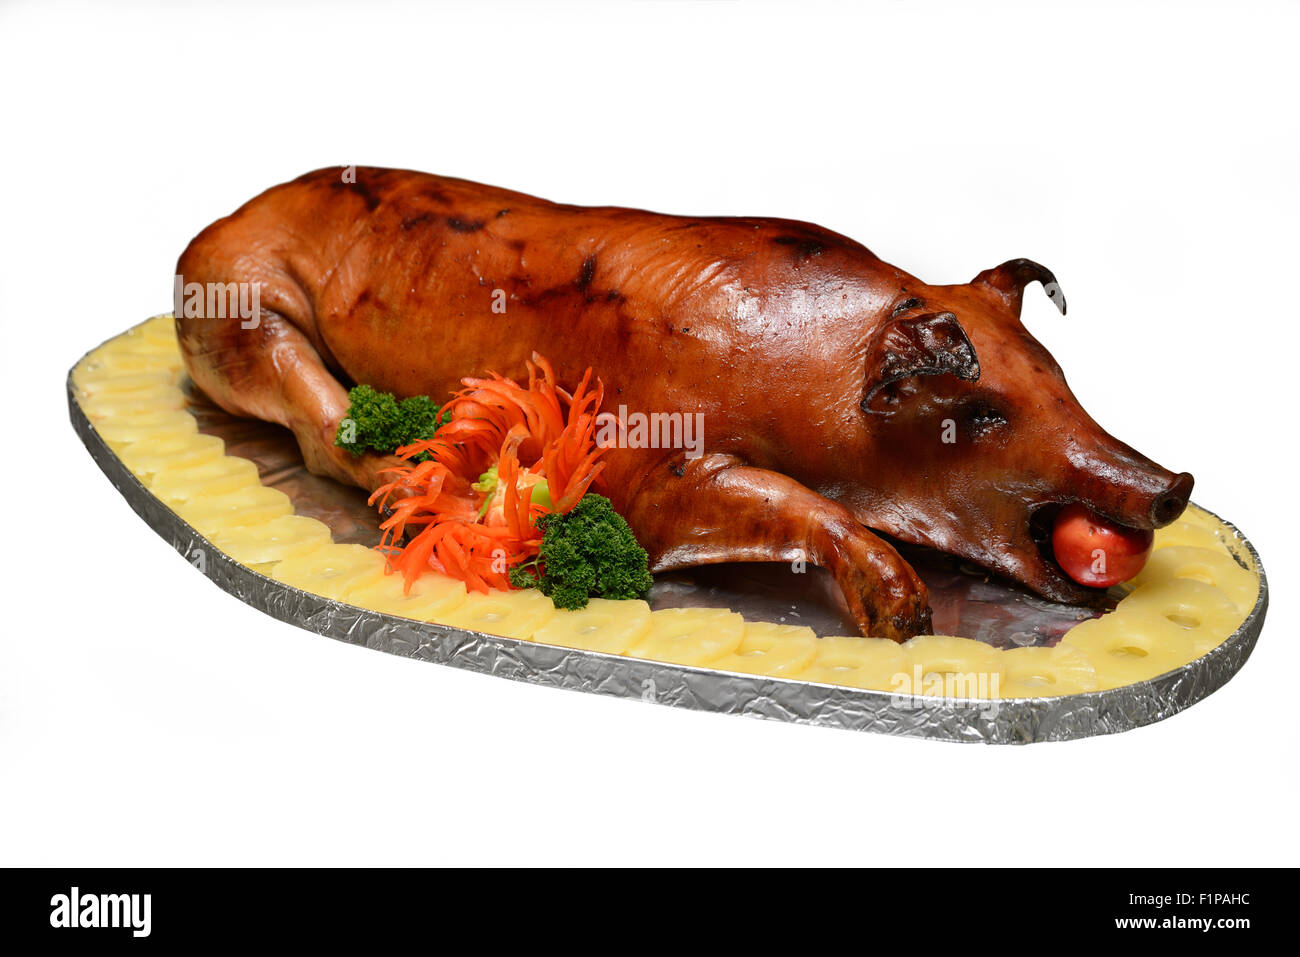 A whole roasted pig ready to serve Stock Photo